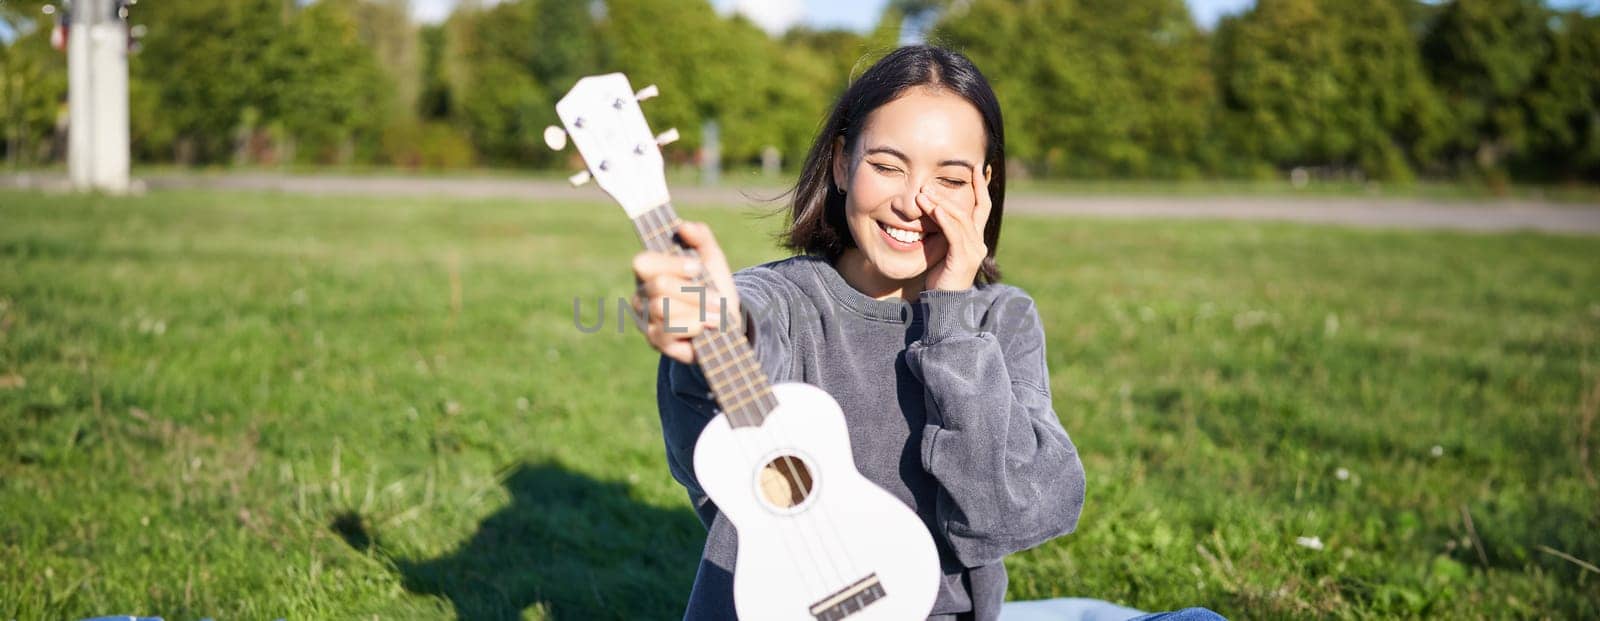 Beautiful asian girl with happy smile, shows her ukulele, sits outside in park on grass, relaxes with music.